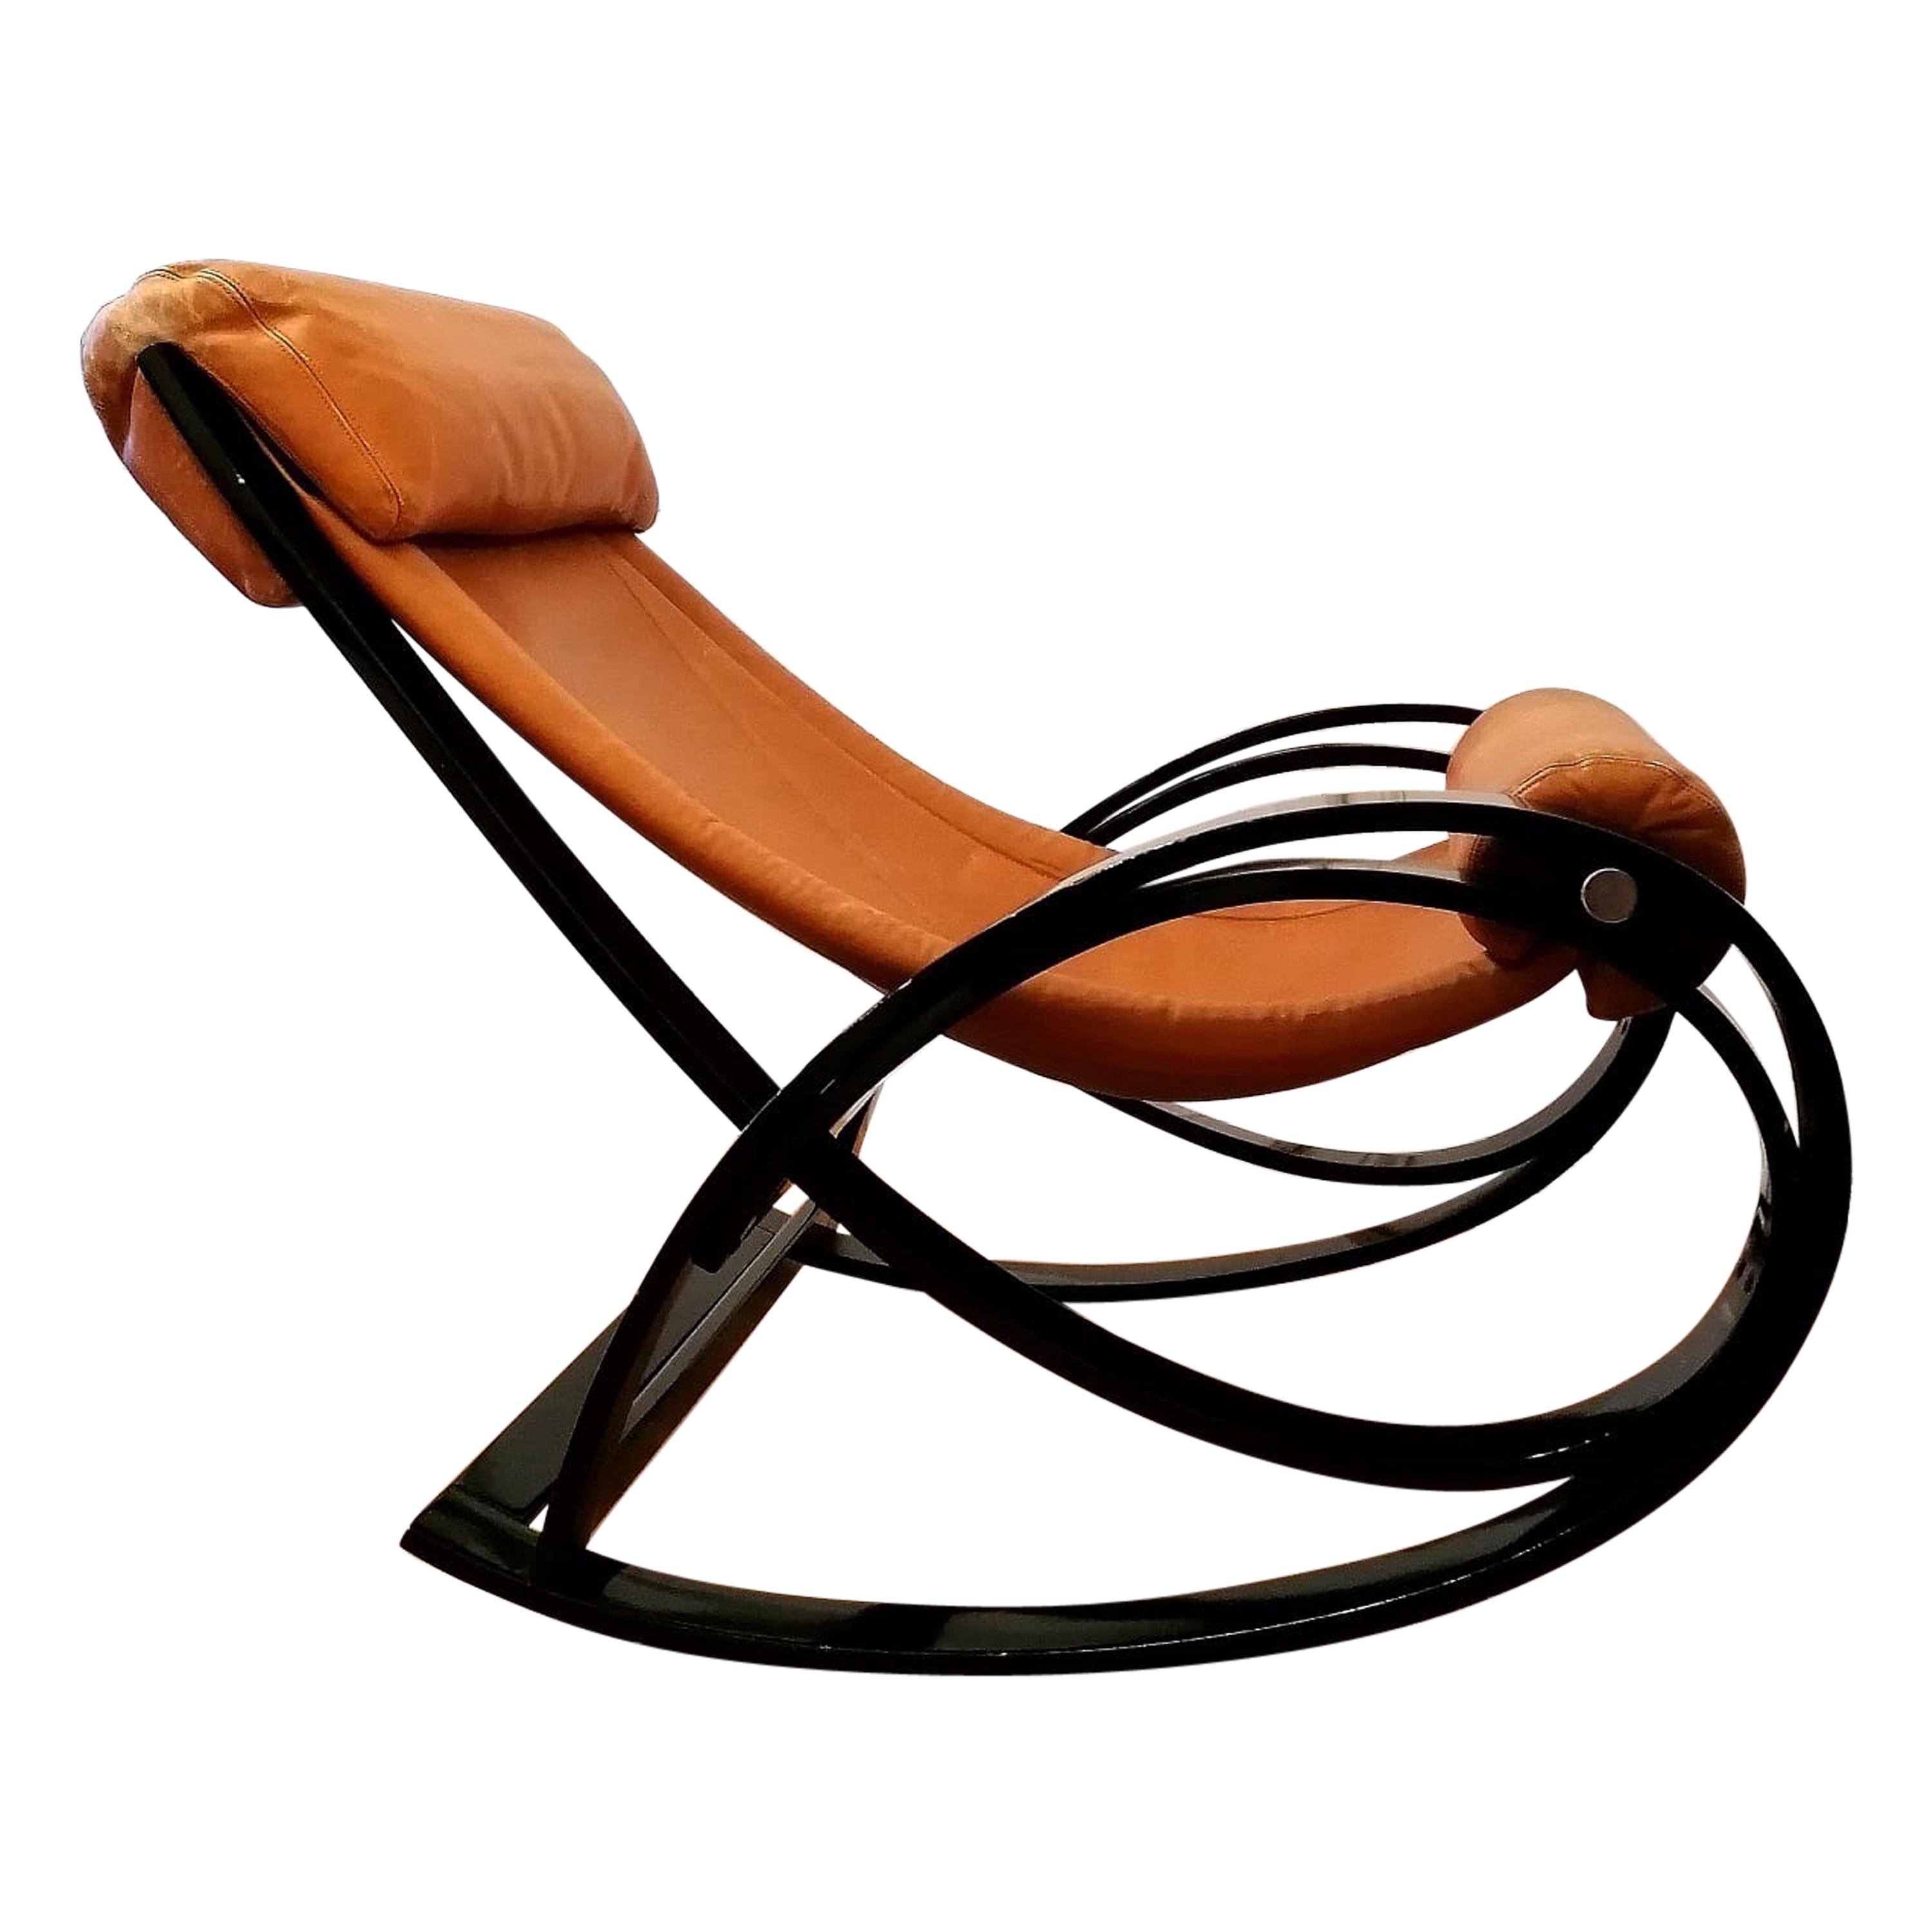 Sgarsul Rocking Chair by Gae Aulenti from Poltronova, Italy, 1960s